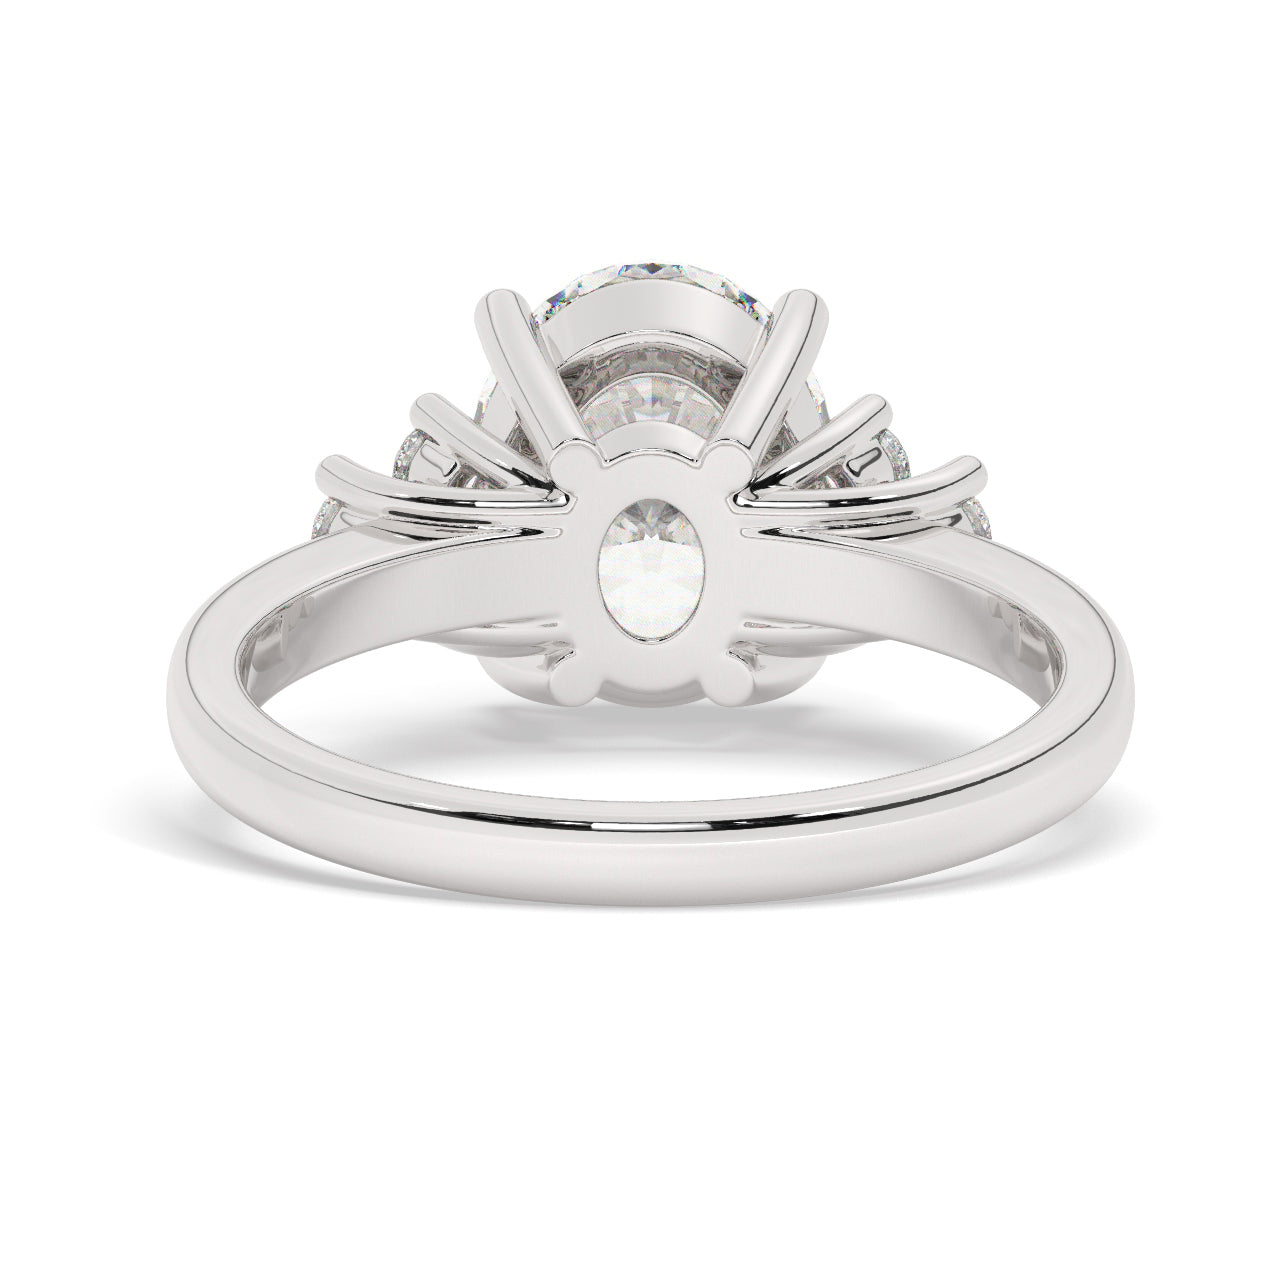 White Gold Oval Cut Engagement Ring with Accompanying Round Stones - Back View